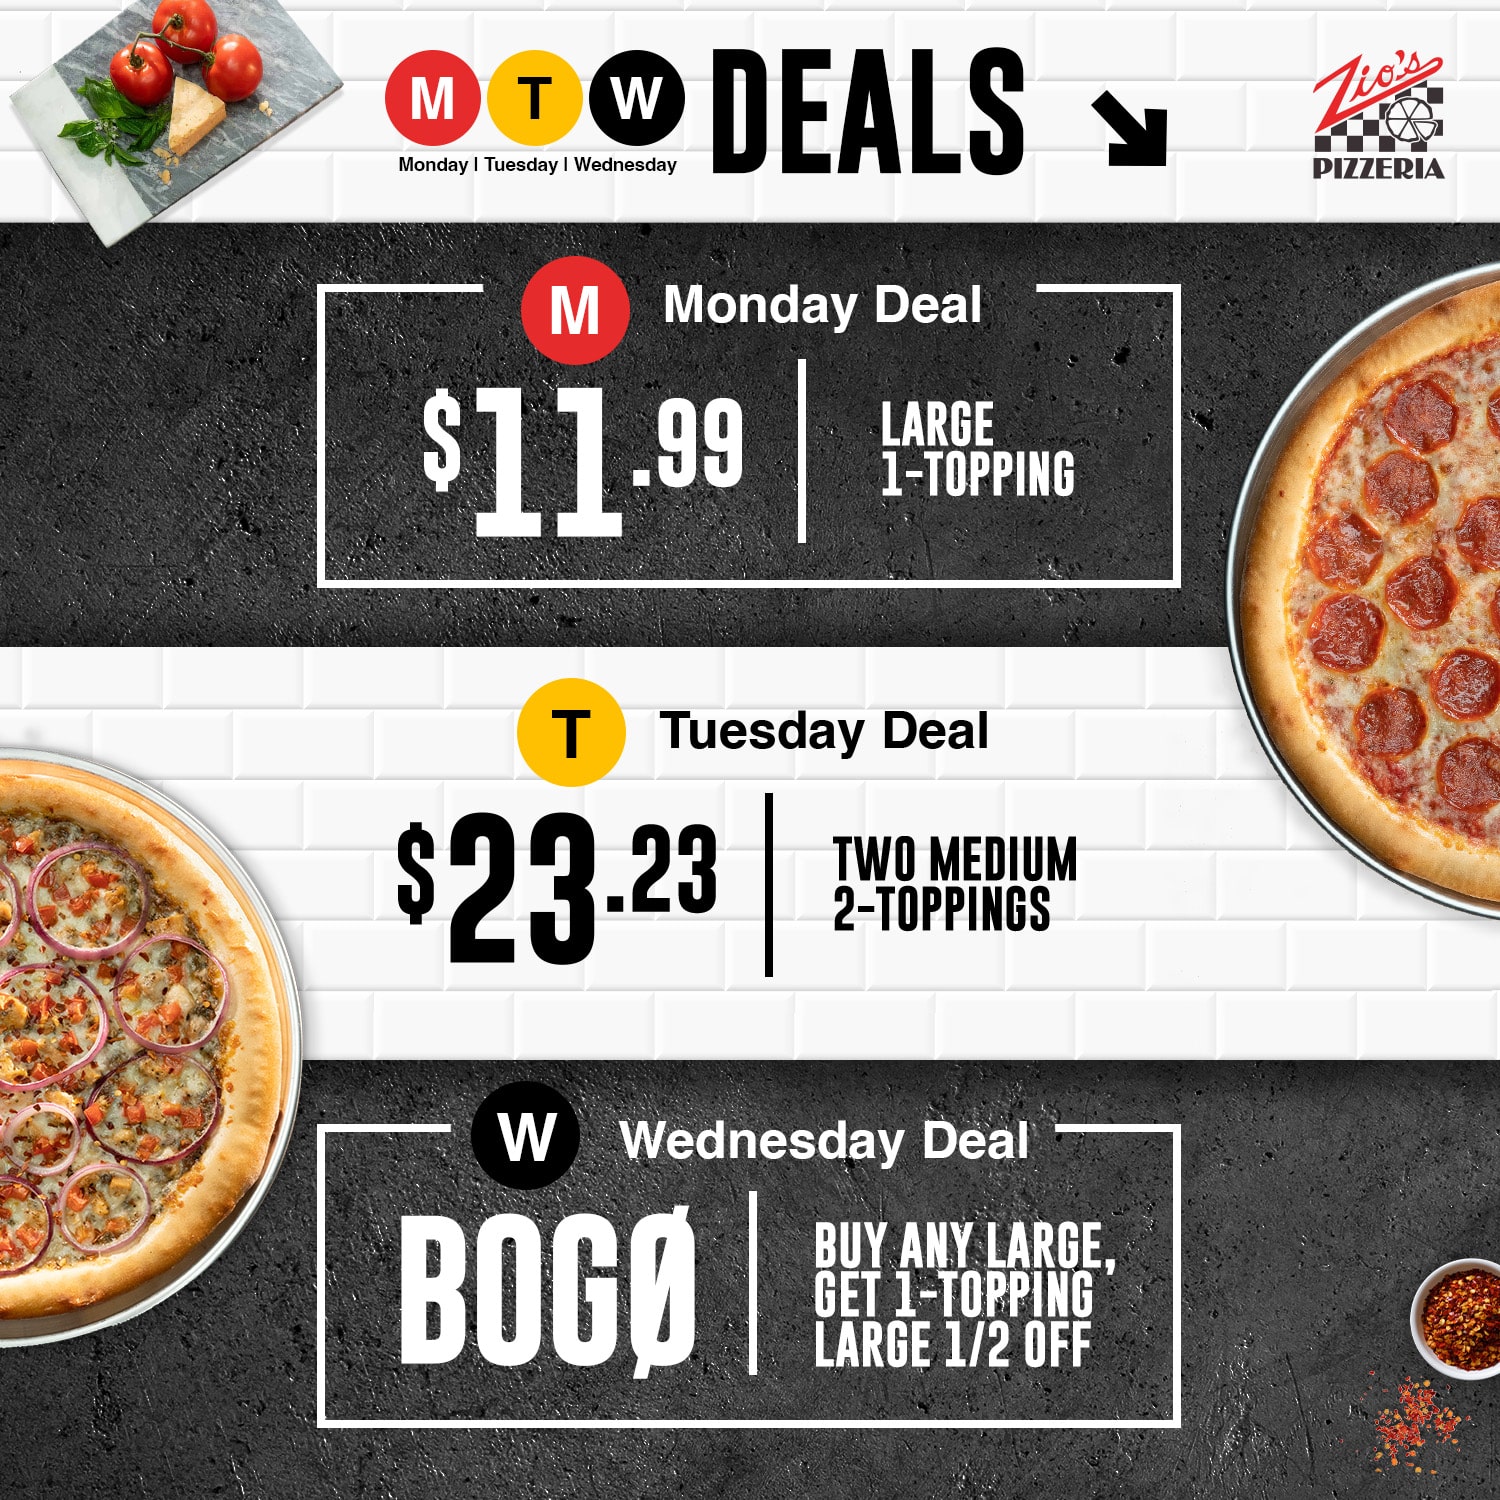 Monday Tuesday Wednesday Deals